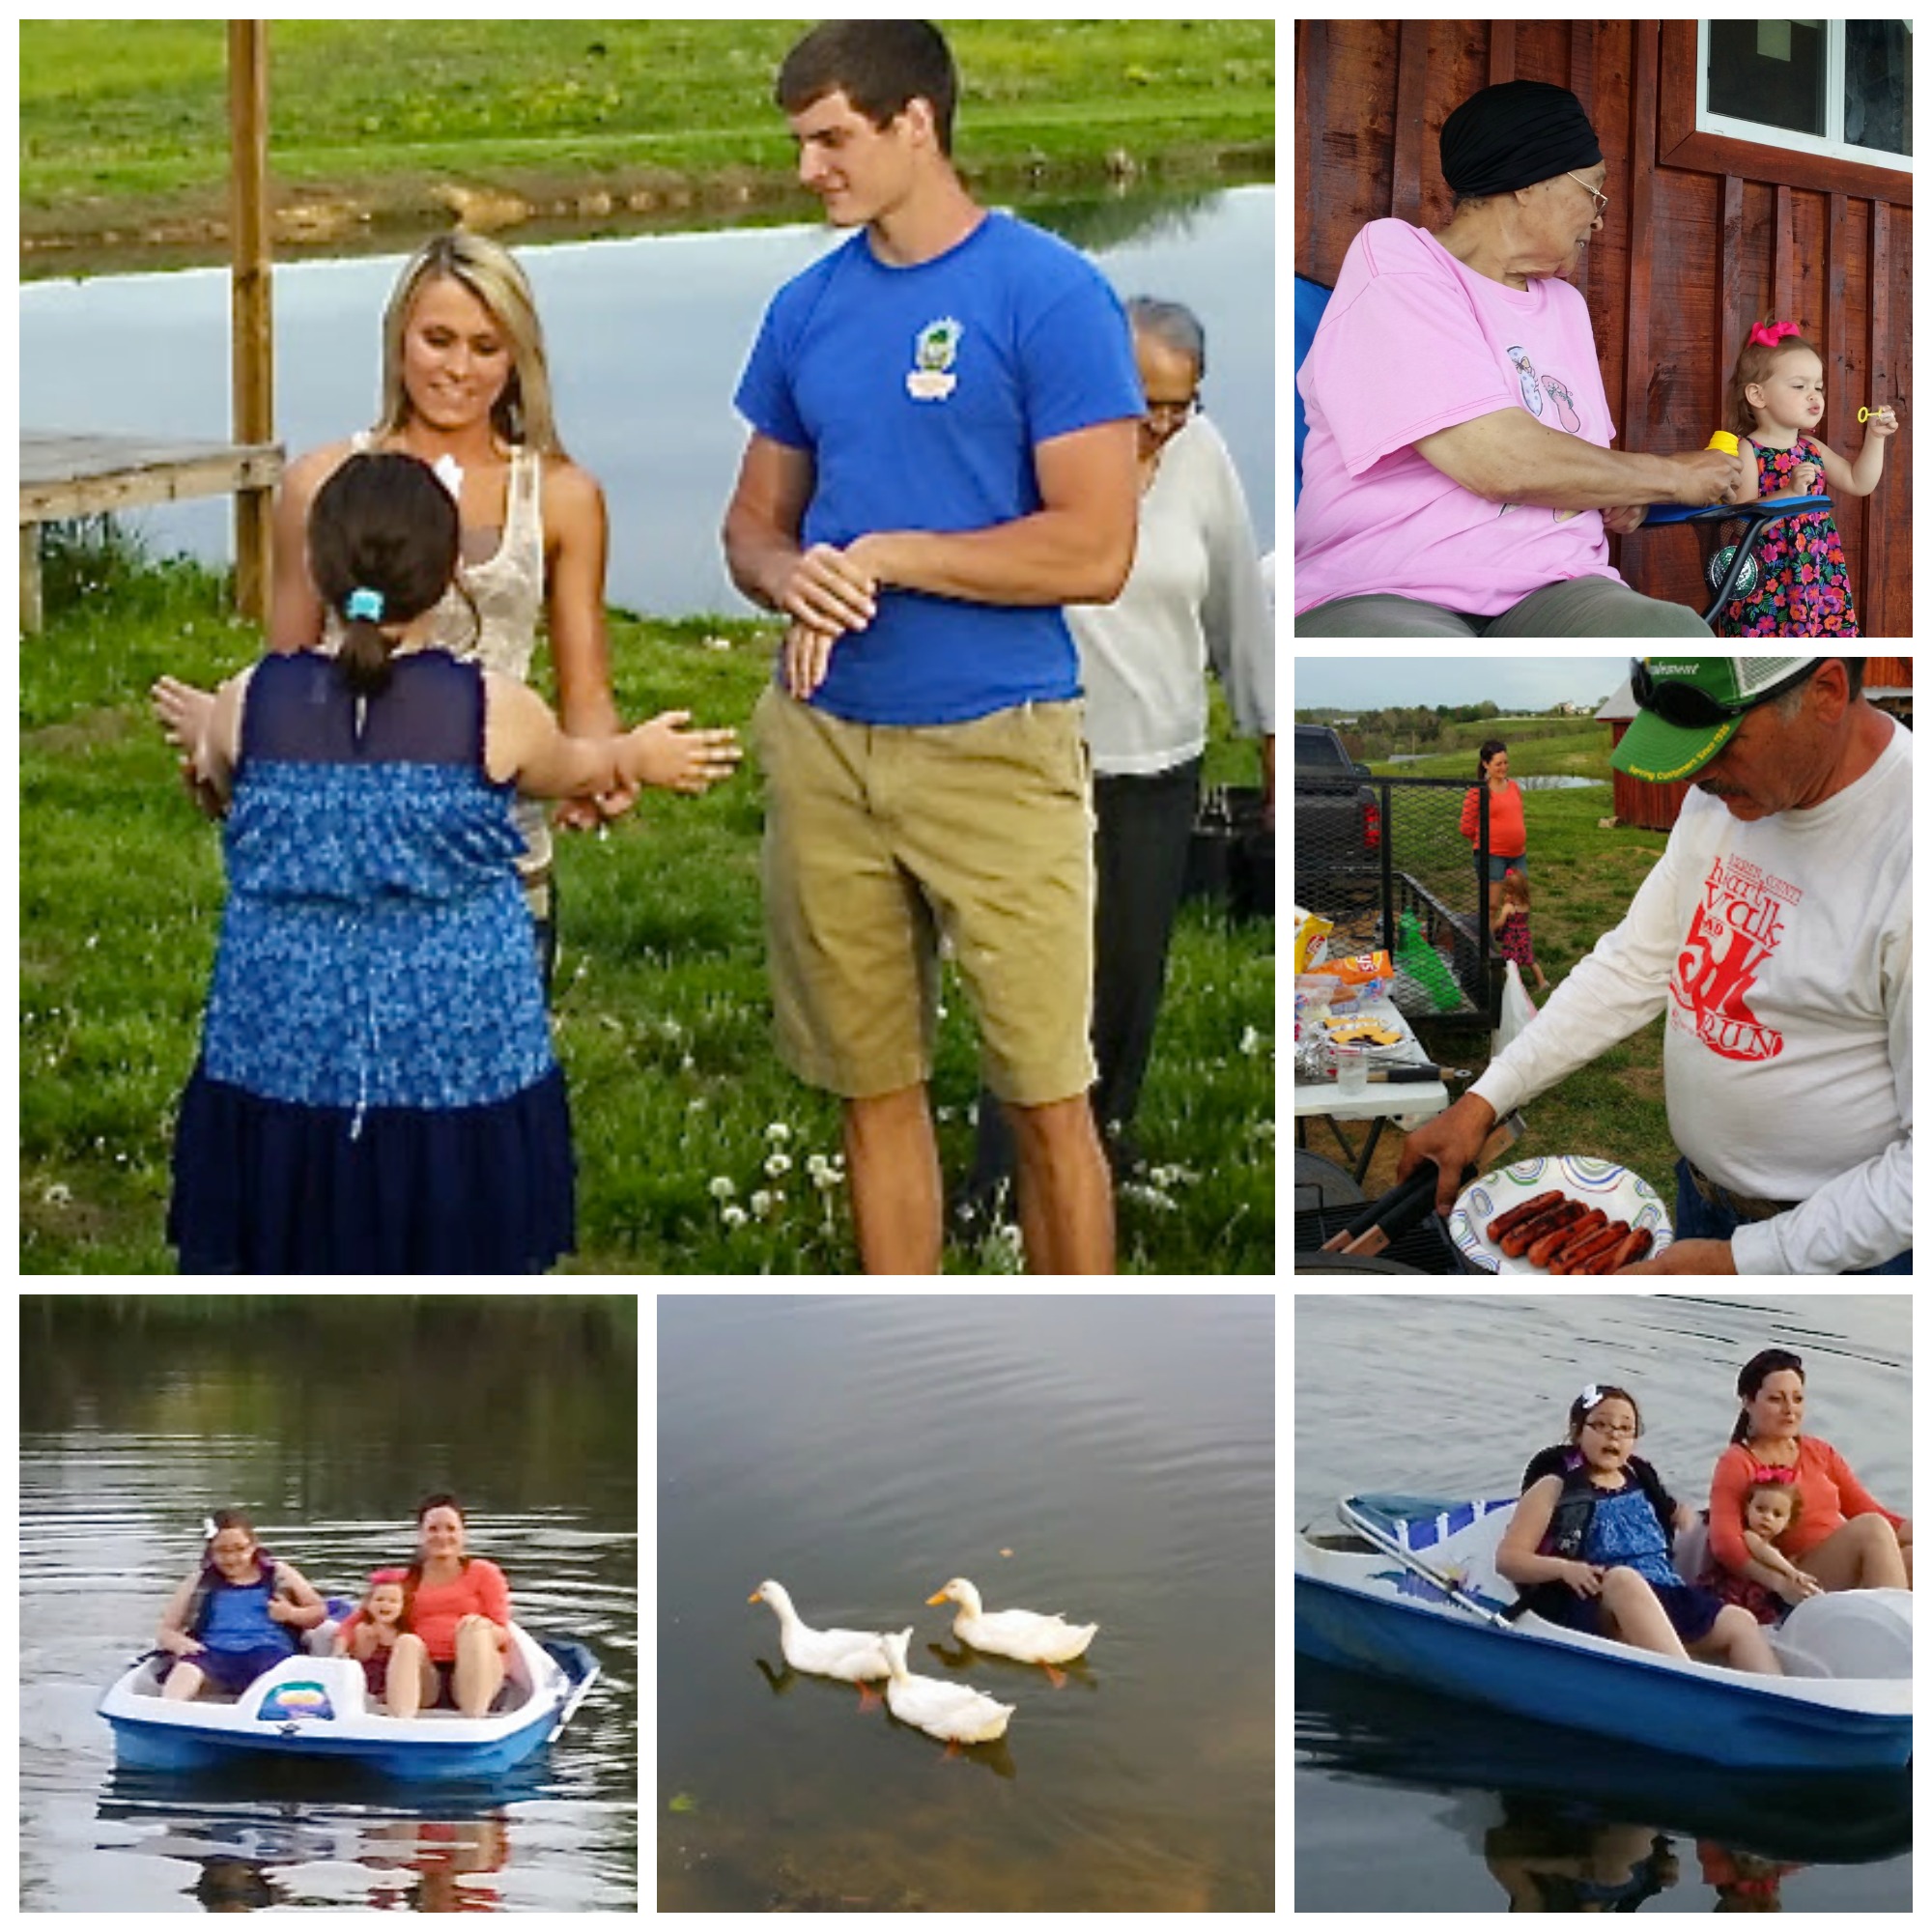 Hotdogs, Cool Ducks and a Paddle Boat